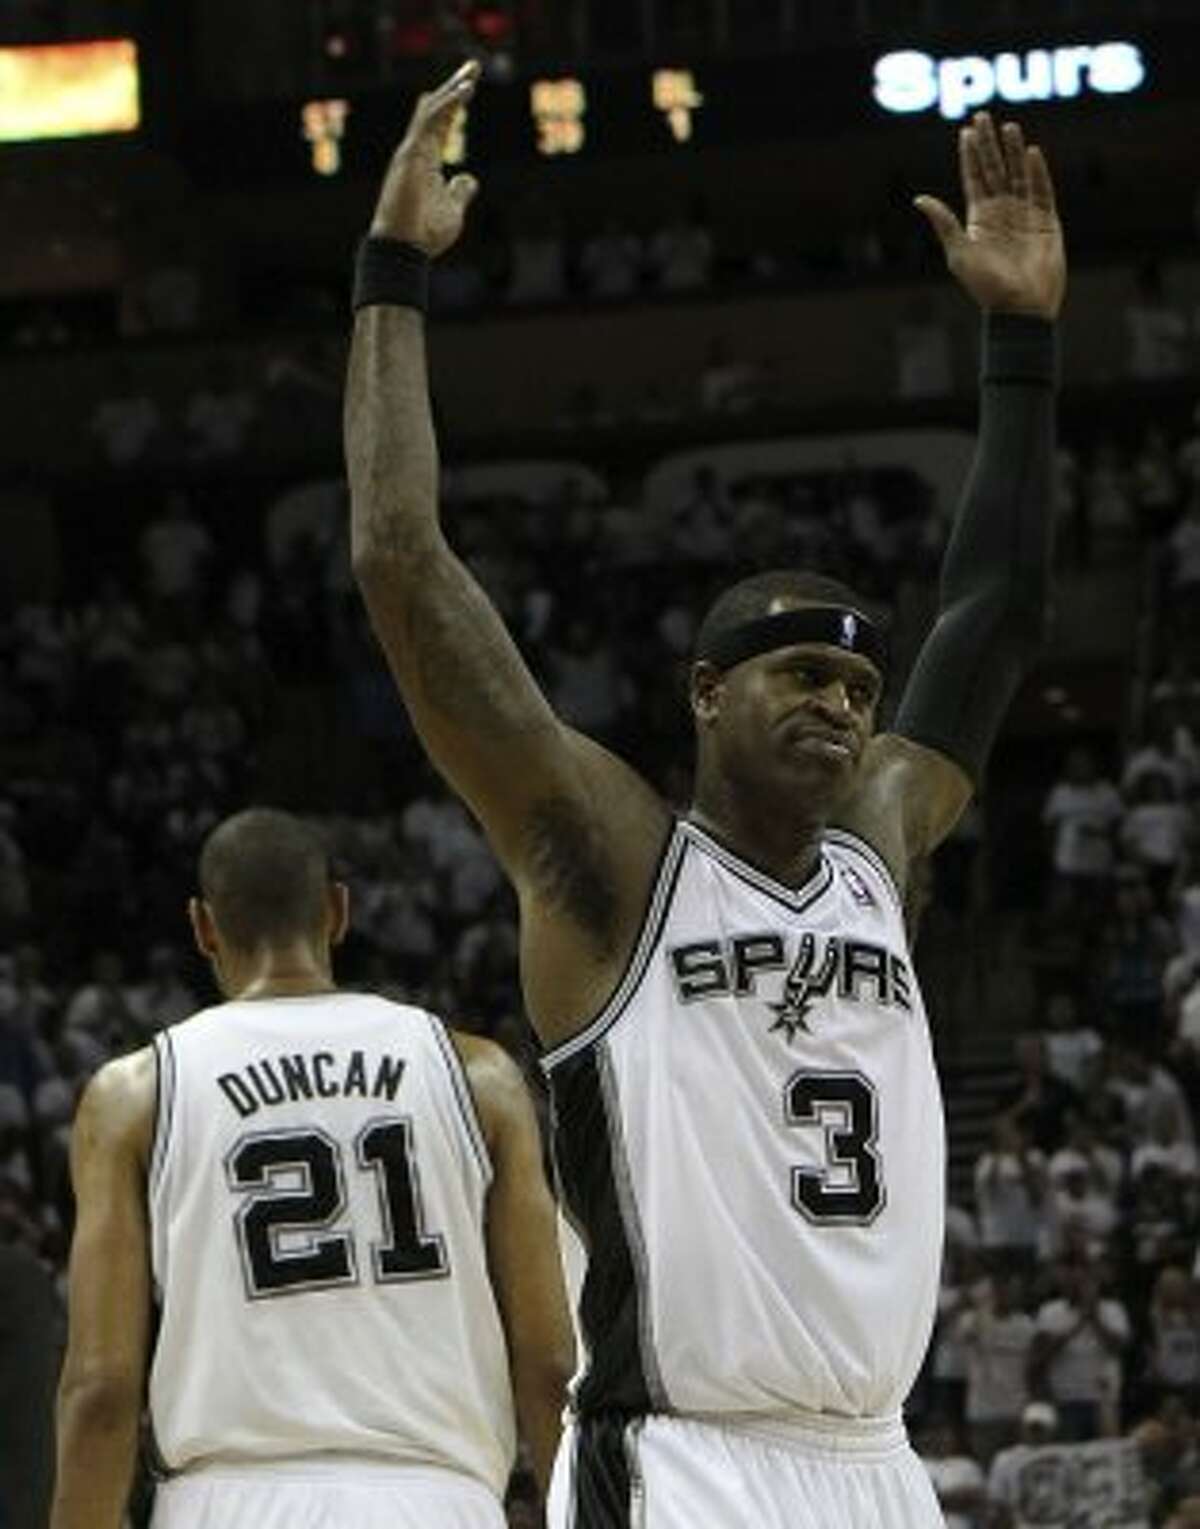 The Spurs' Stephen Jackson says he's ready to play all 48 minutes tonight if need be.